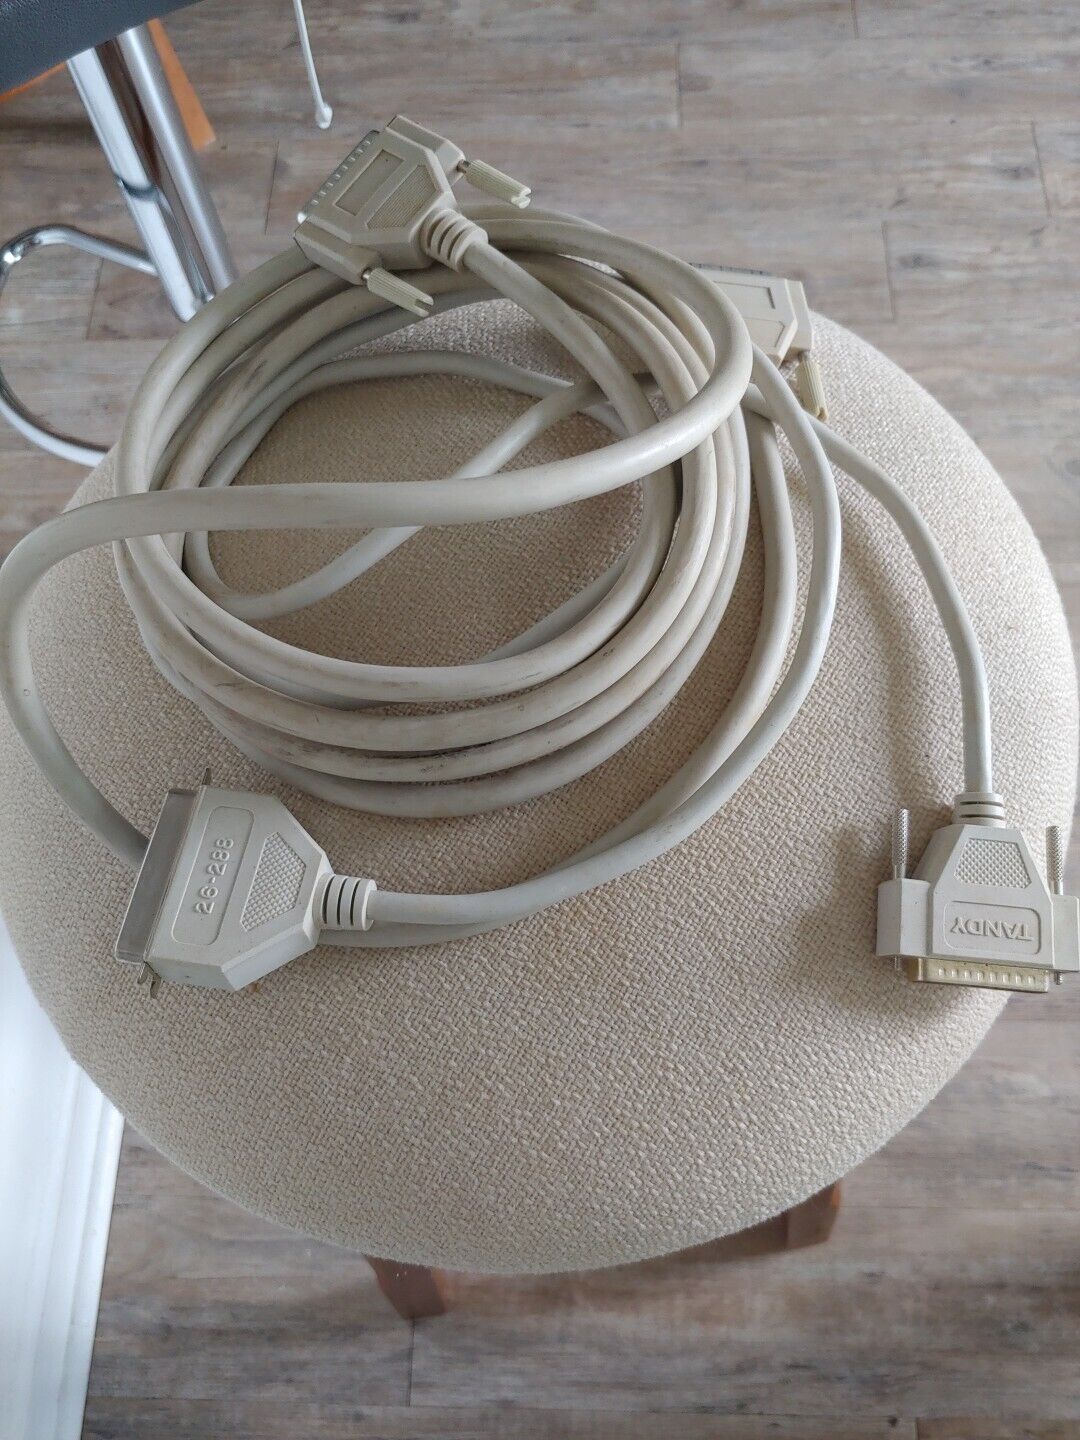 2 Vintage Tandy Computer Products 6’ Cable 25 Pin Original Tandy Product 26-288